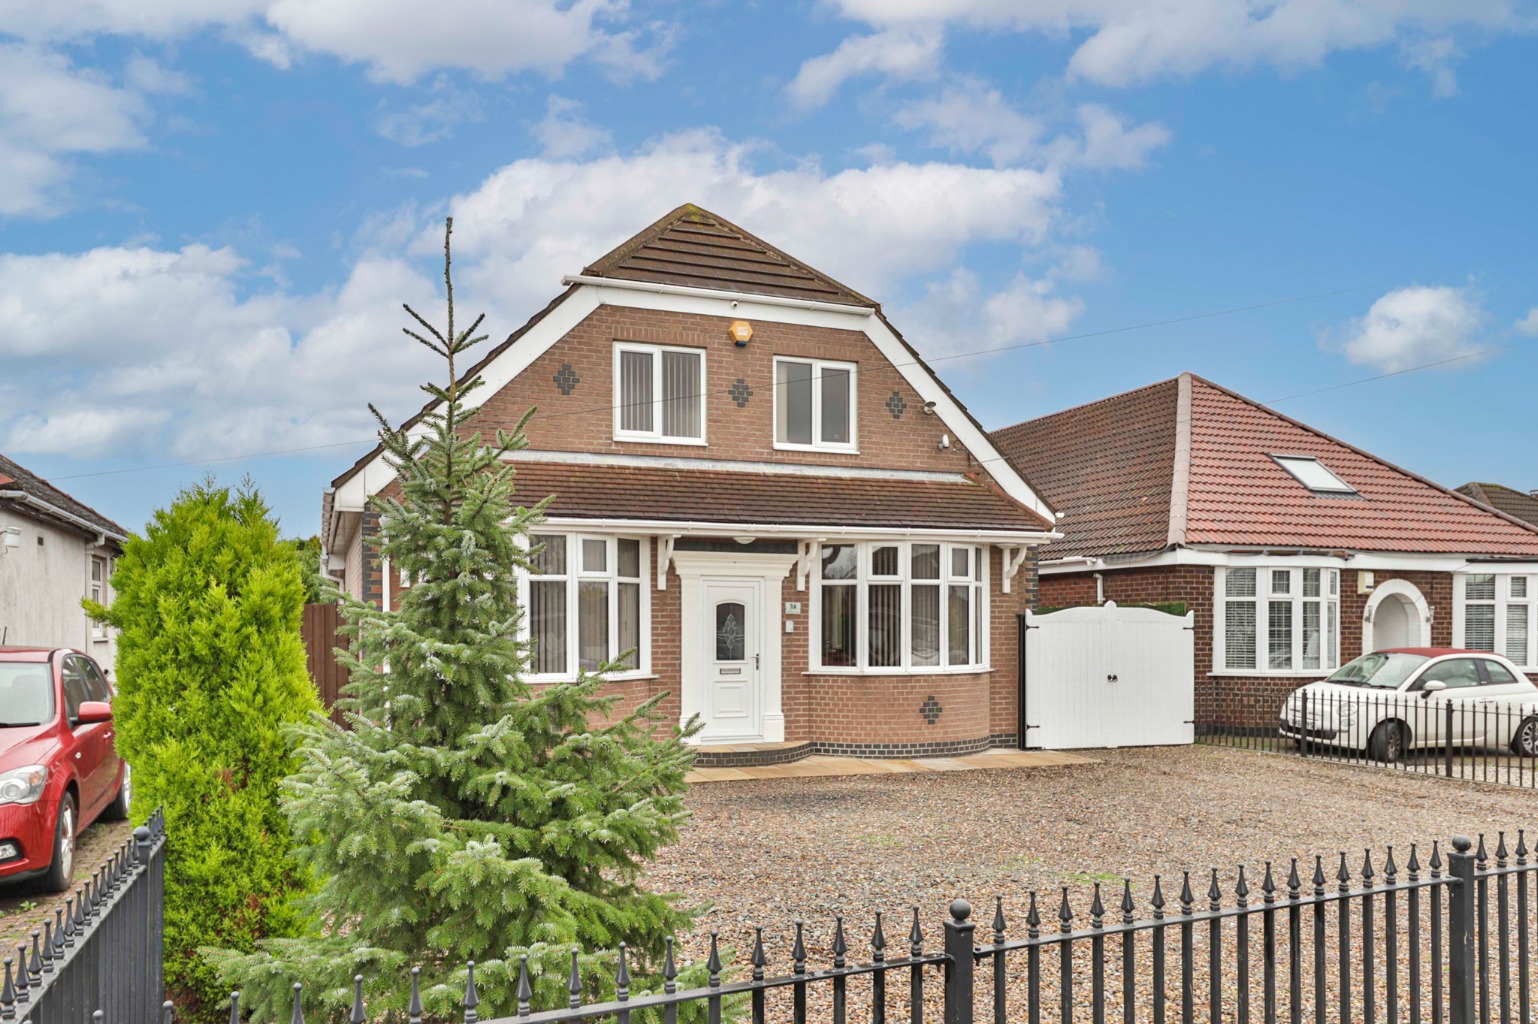 5 bed detached house for sale in Holmes Lane, Hull - Property Image 1